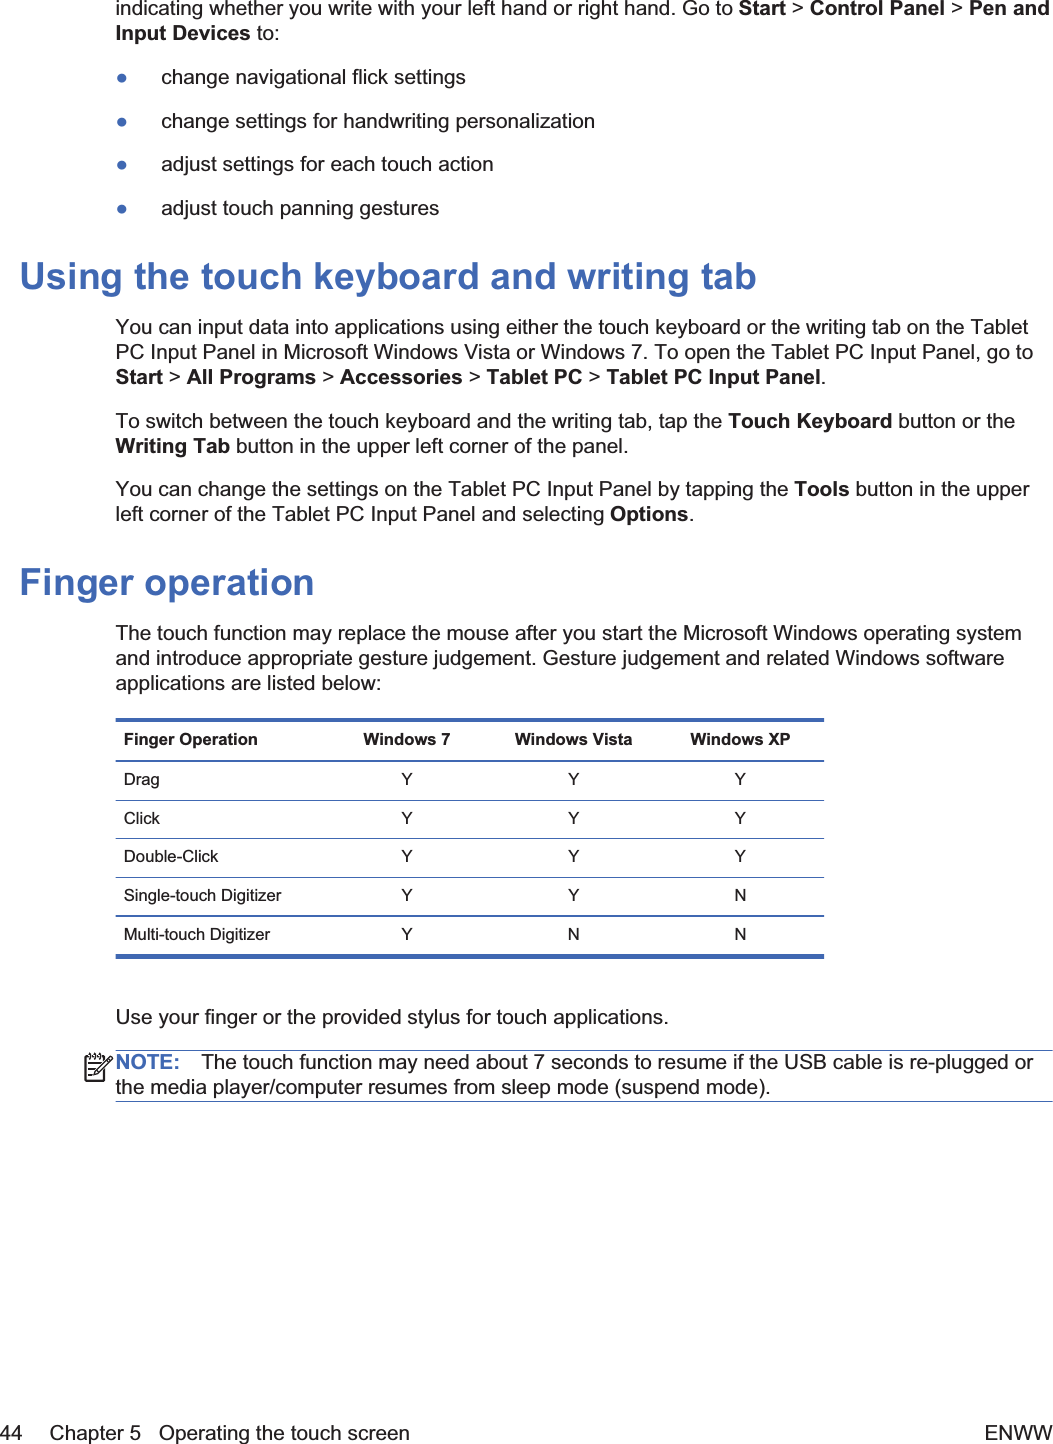 indicating whether you write with your left hand or right hand. Go to Start &gt; Control Panel &gt; Pen andInput Devices to:łchange navigational flick settingsłchange settings for handwriting personalizationładjust settings for each touch actionładjust touch panning gesturesUsing the touch keyboard and writing tabYou can input data into applications using either the touch keyboard or the writing tab on the TabletPC Input Panel in Microsoft Windows Vista or Windows 7. To open the Tablet PC Input Panel, go toStart &gt; All Programs &gt; Accessories &gt; Tablet PC &gt; Tablet PC Input Panel.To switch between the touch keyboard and the writing tab, tap the Touch Keyboard button or theWriting Tab button in the upper left corner of the panel.You can change the settings on the Tablet PC Input Panel by tapping the Tools button in the upperleft corner of the Tablet PC Input Panel and selecting Options.Finger operationThe touch function may replace the mouse after you start the Microsoft Windows operating systemand introduce appropriate gesture judgement. Gesture judgement and related Windows softwareapplications are listed below:Finger Operation Windows 7 Windows Vista Windows XPDrag YYYClick YYYDouble-Click Y Y YSingle-touch Digitizer Y Y NMulti-touch Digitizer Y N NUse your finger or the provided stylus for touch applications.NOTE: The touch function may need about 7 seconds to resume if the USB cable is re-plugged orthe media player/computer resumes from sleep mode (suspend mode).44 Chapter 5   Operating the touch screen ENWW